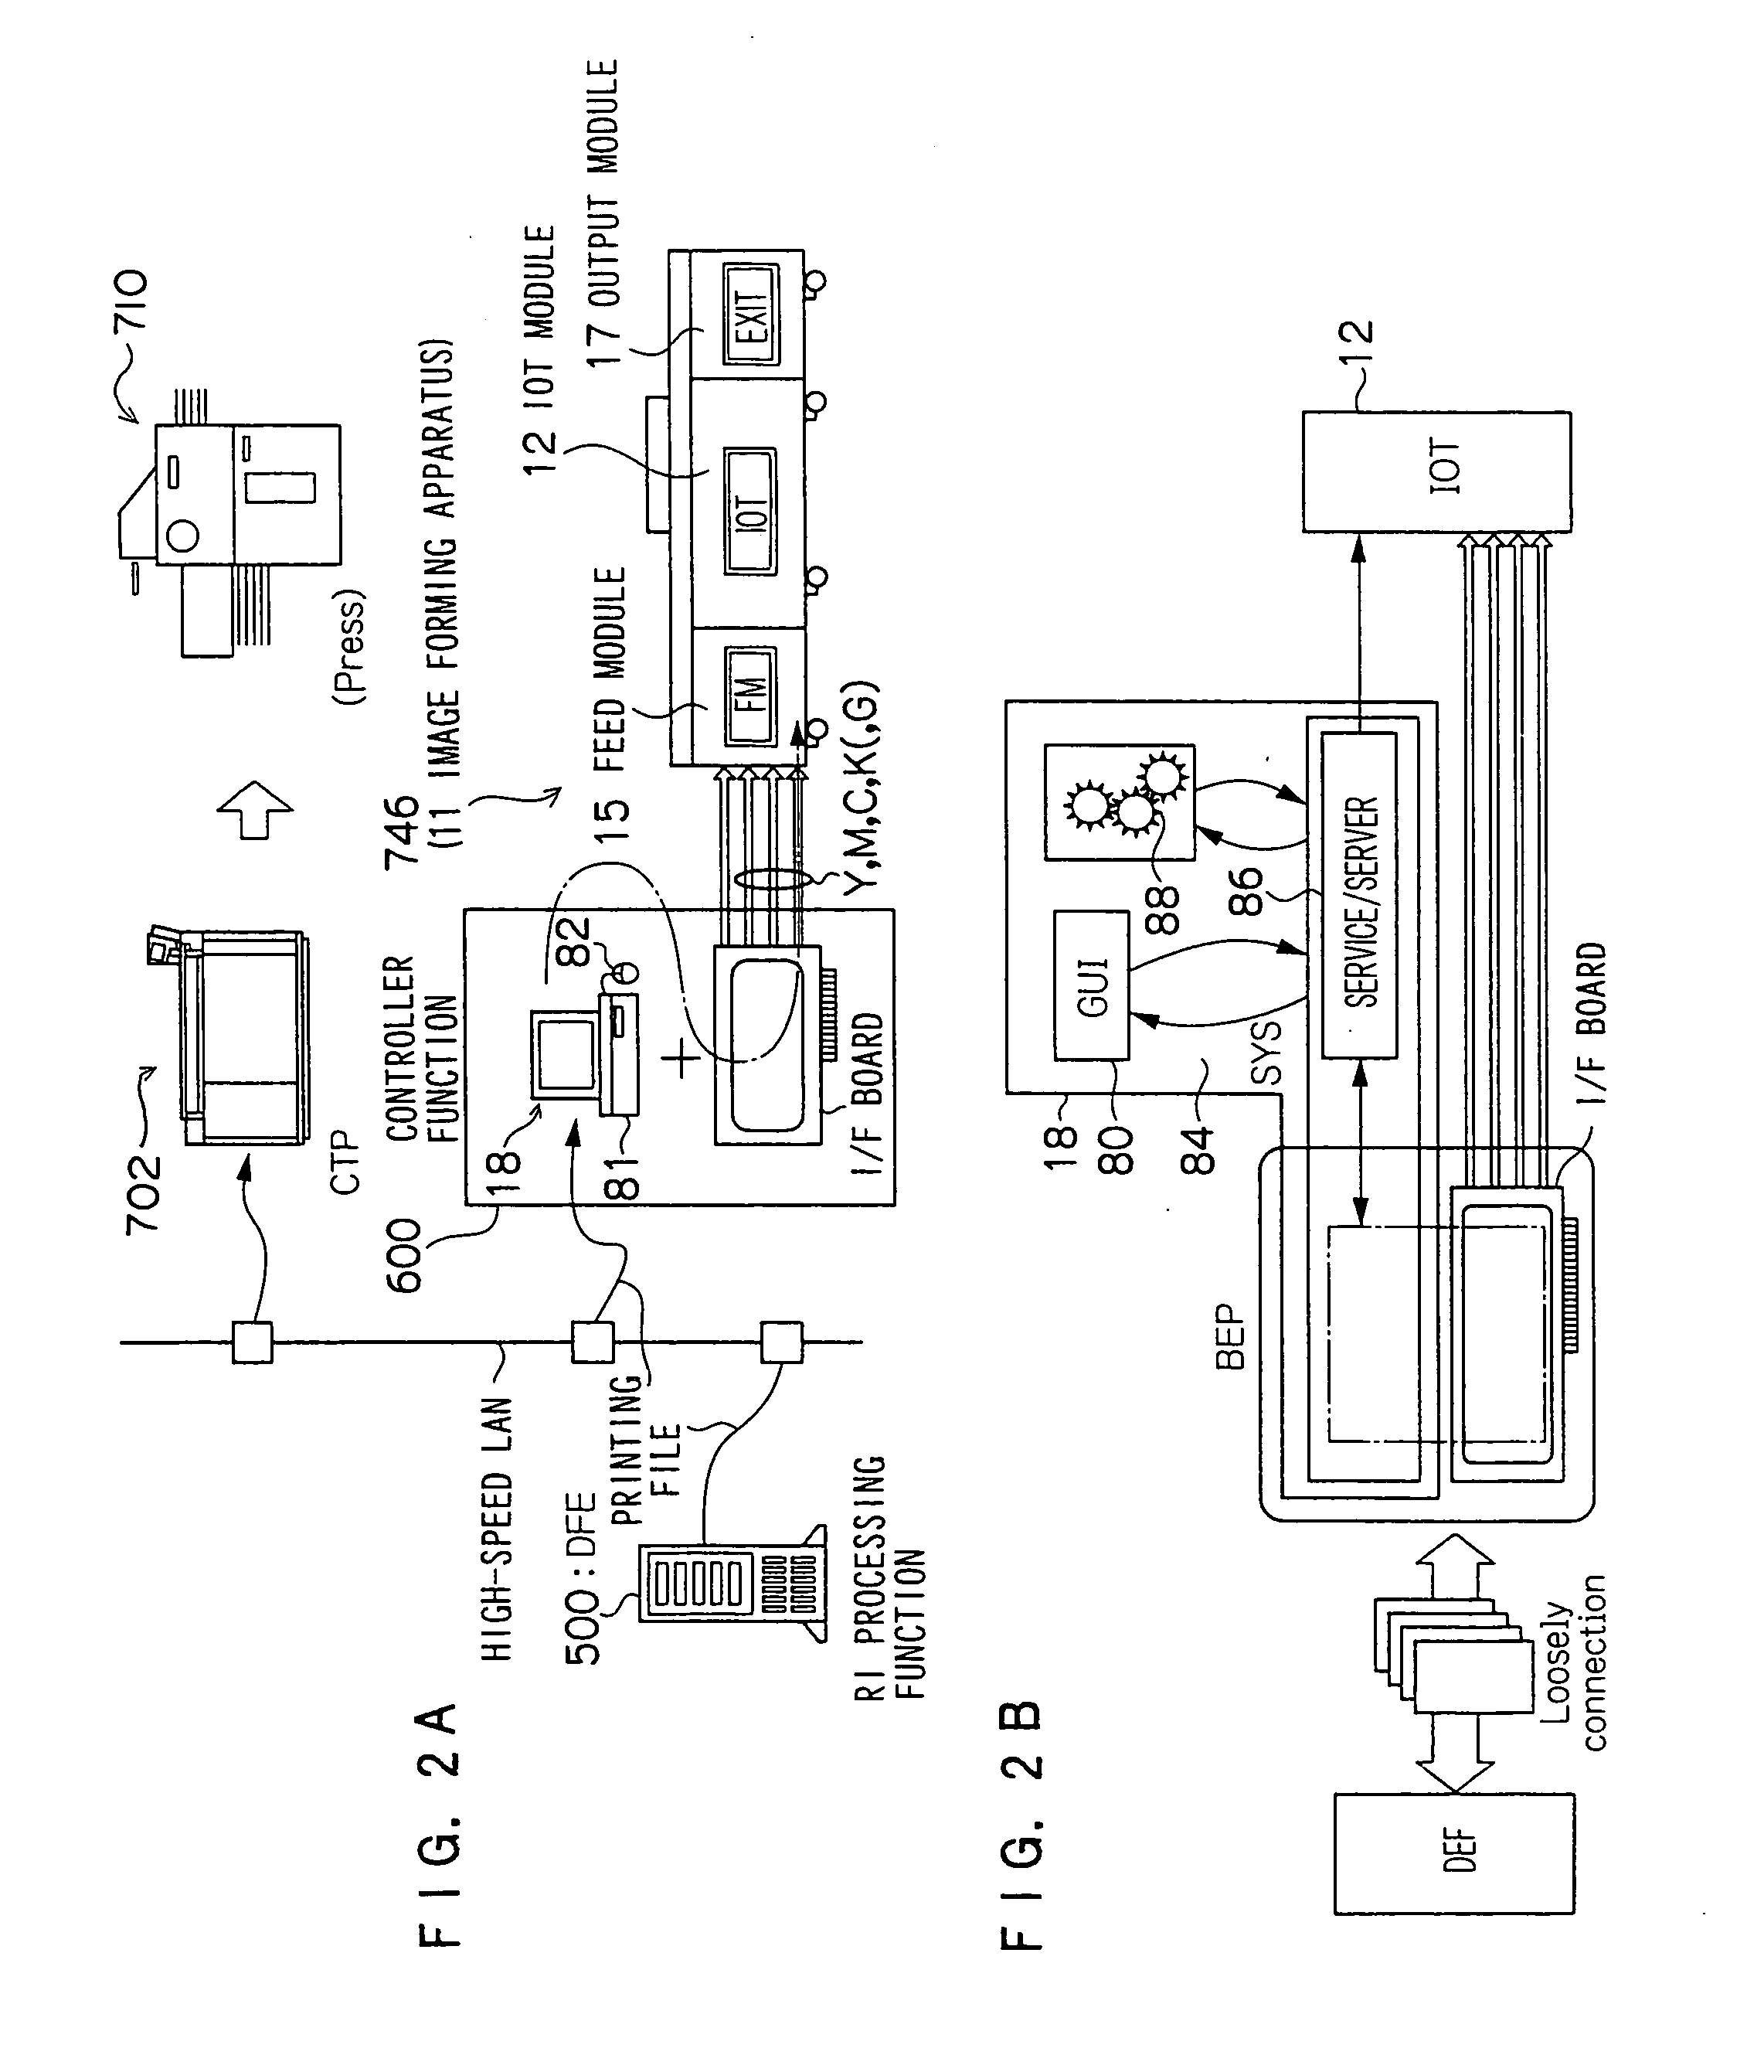 Image formation assisting device, image formation assisting method, and image formation assisting system